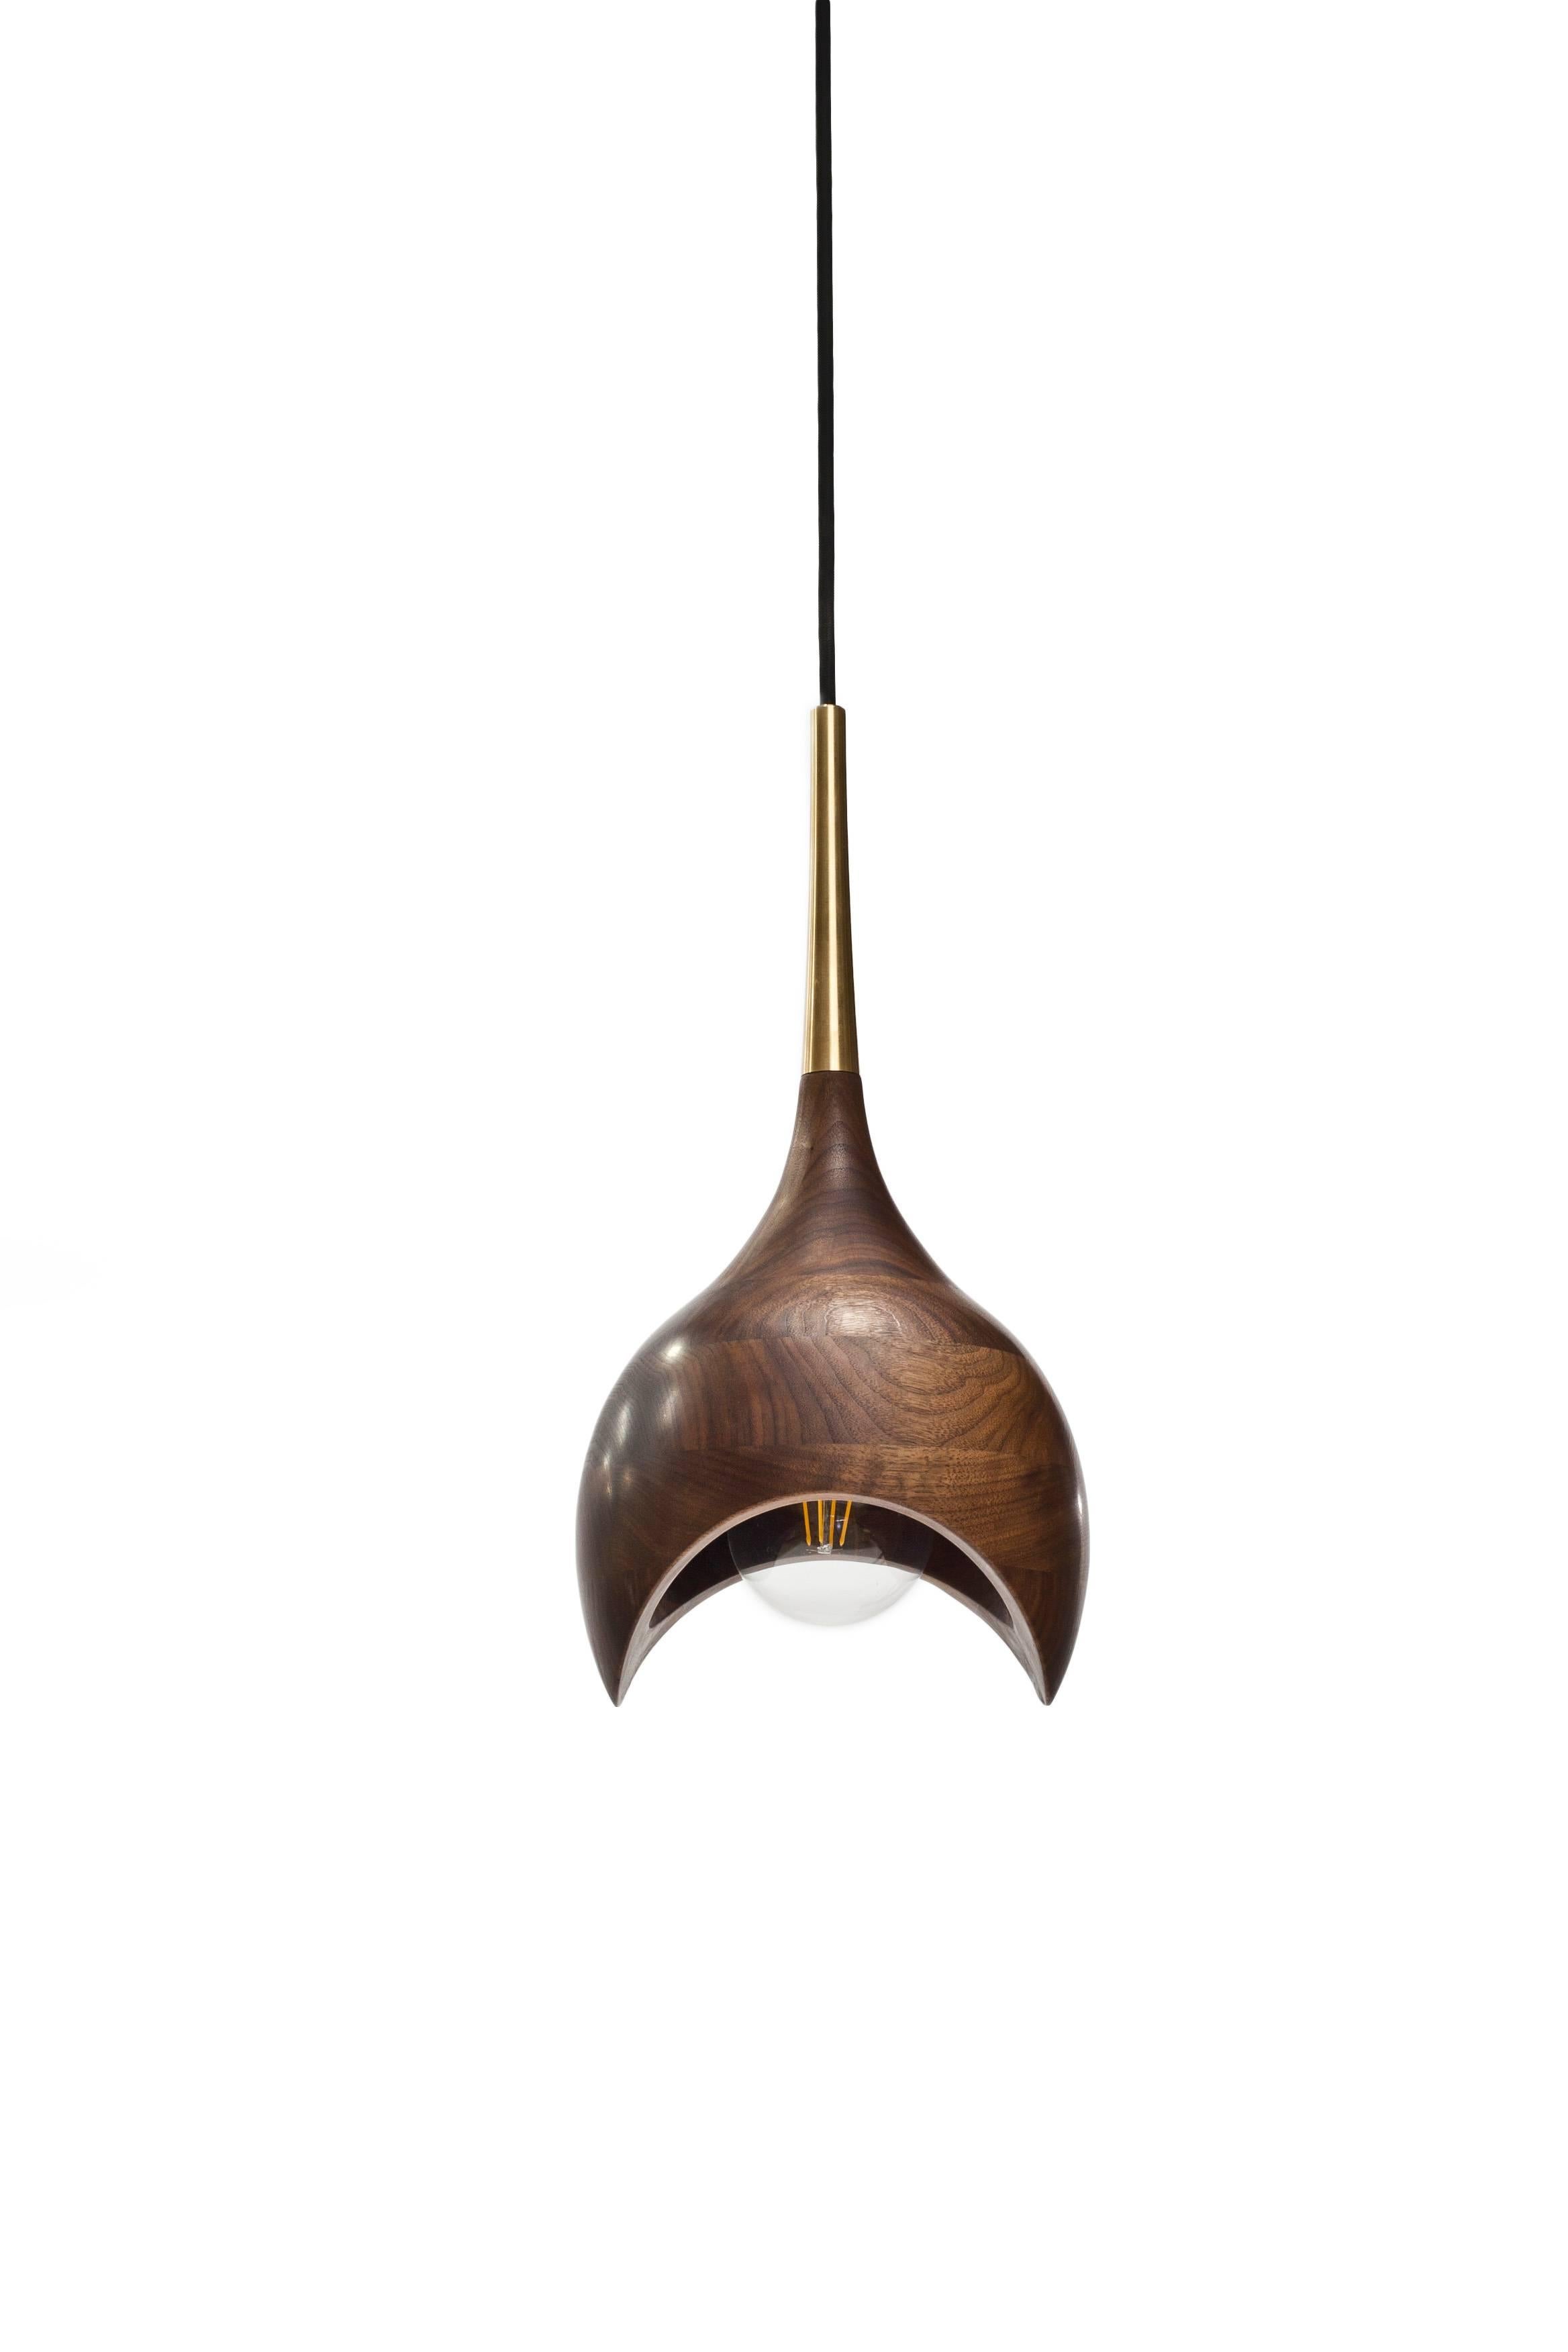 Norwegian Dråpe Pendant Lamp in Oiled Walnut and Turned Brass by Ronny Buarøy for Wooda For Sale